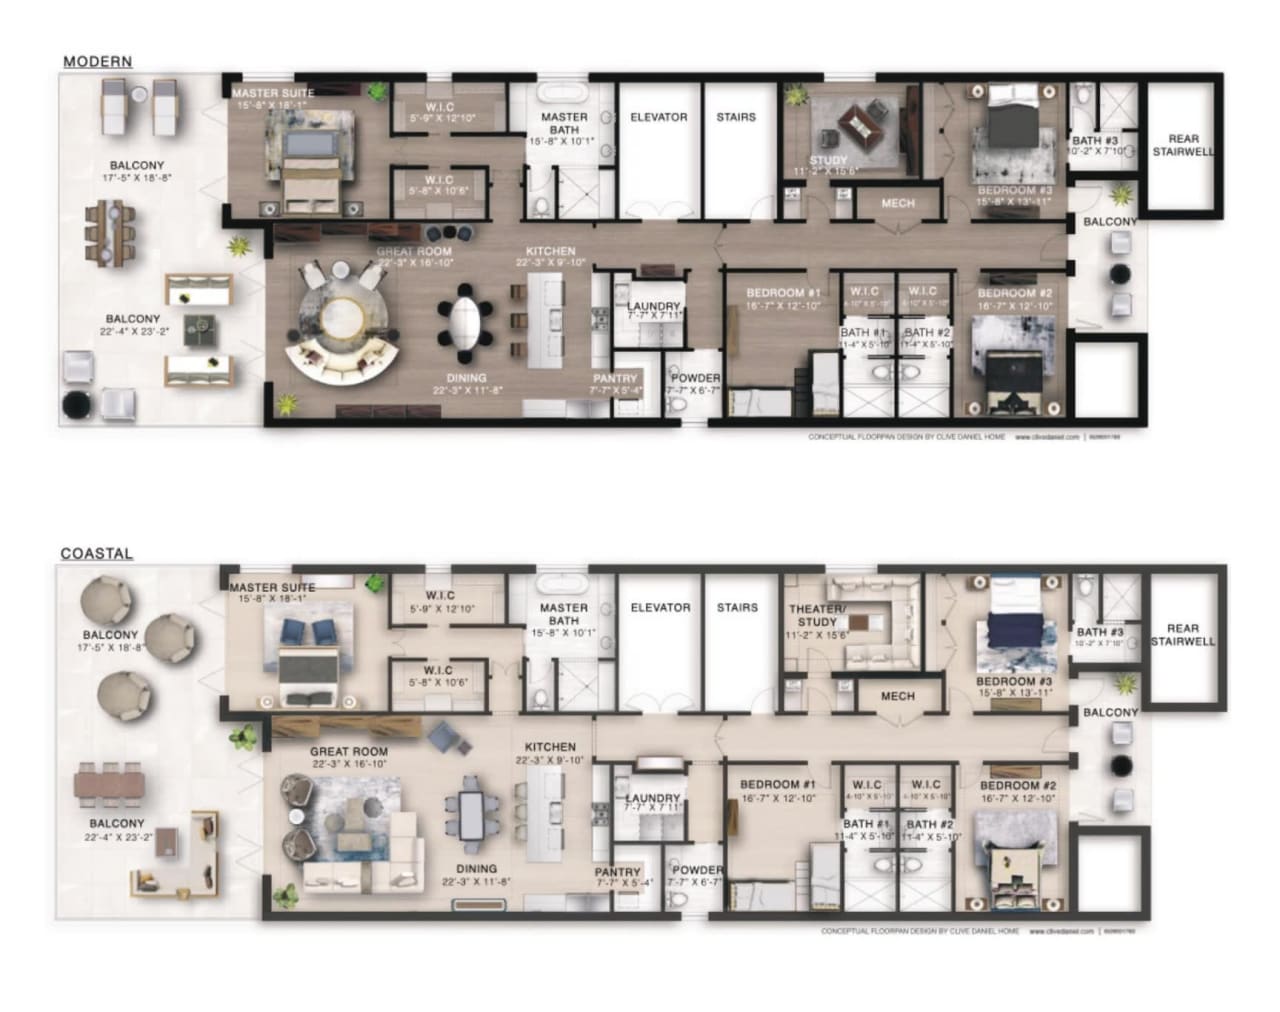 Two types of floor plans of a modern or coastal house.